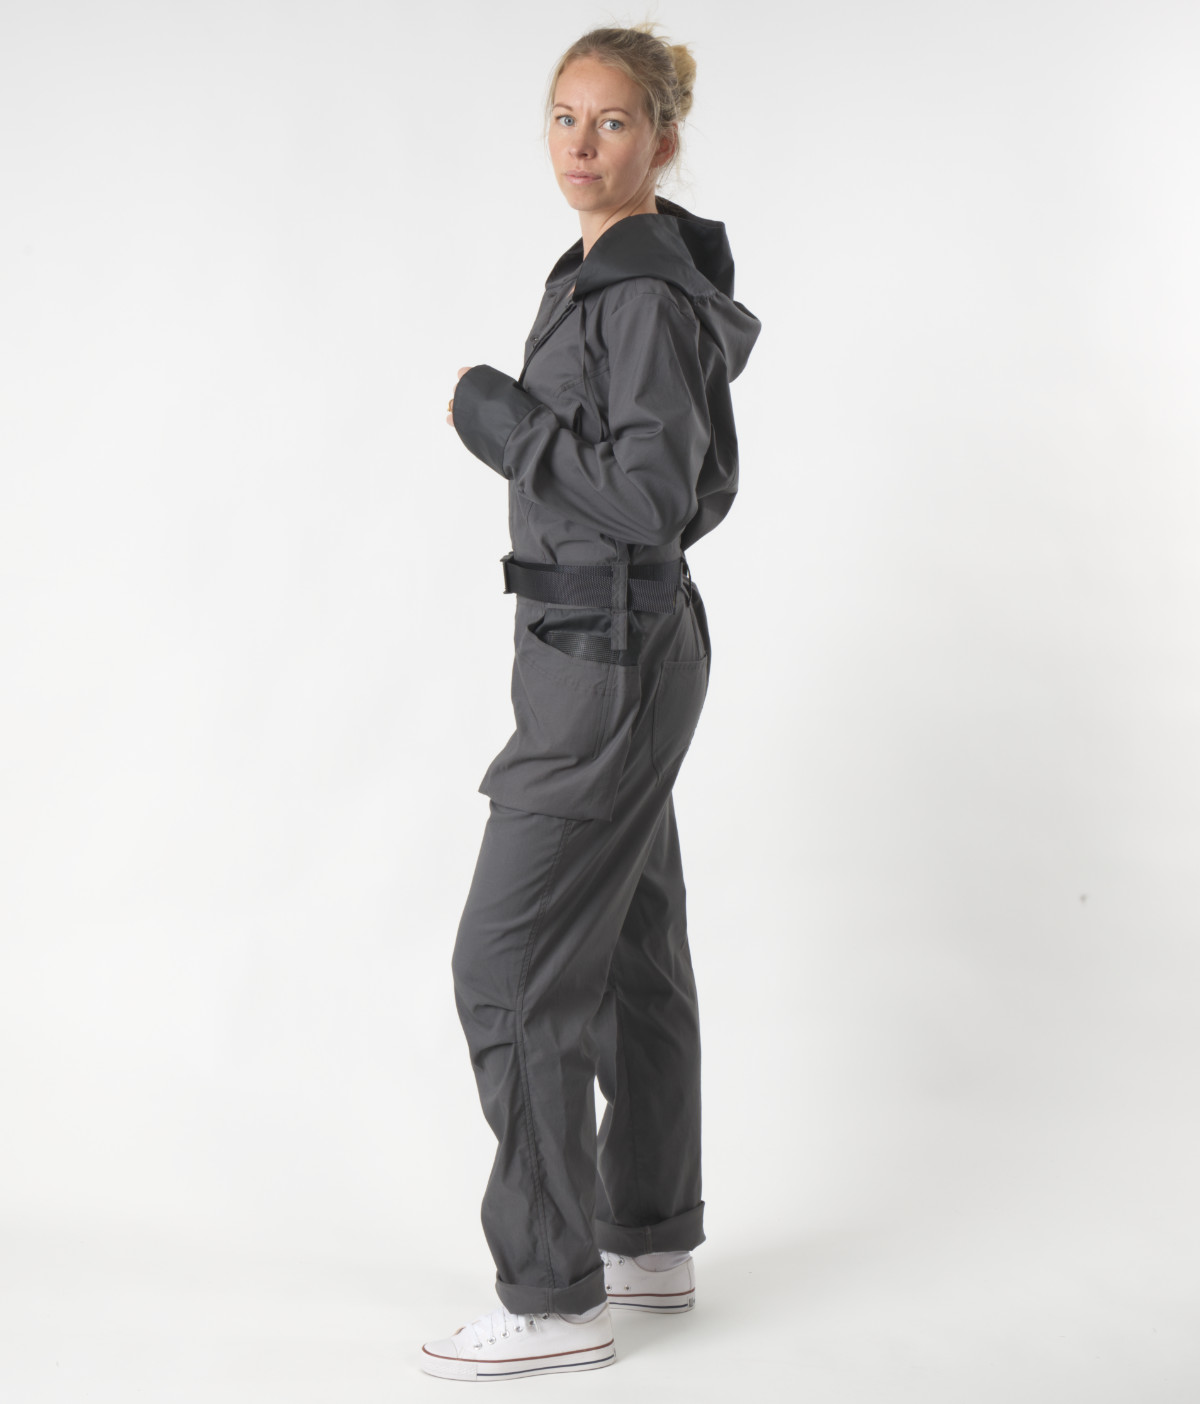 , modell: Coverall stretch, kvalitet: Mullvad